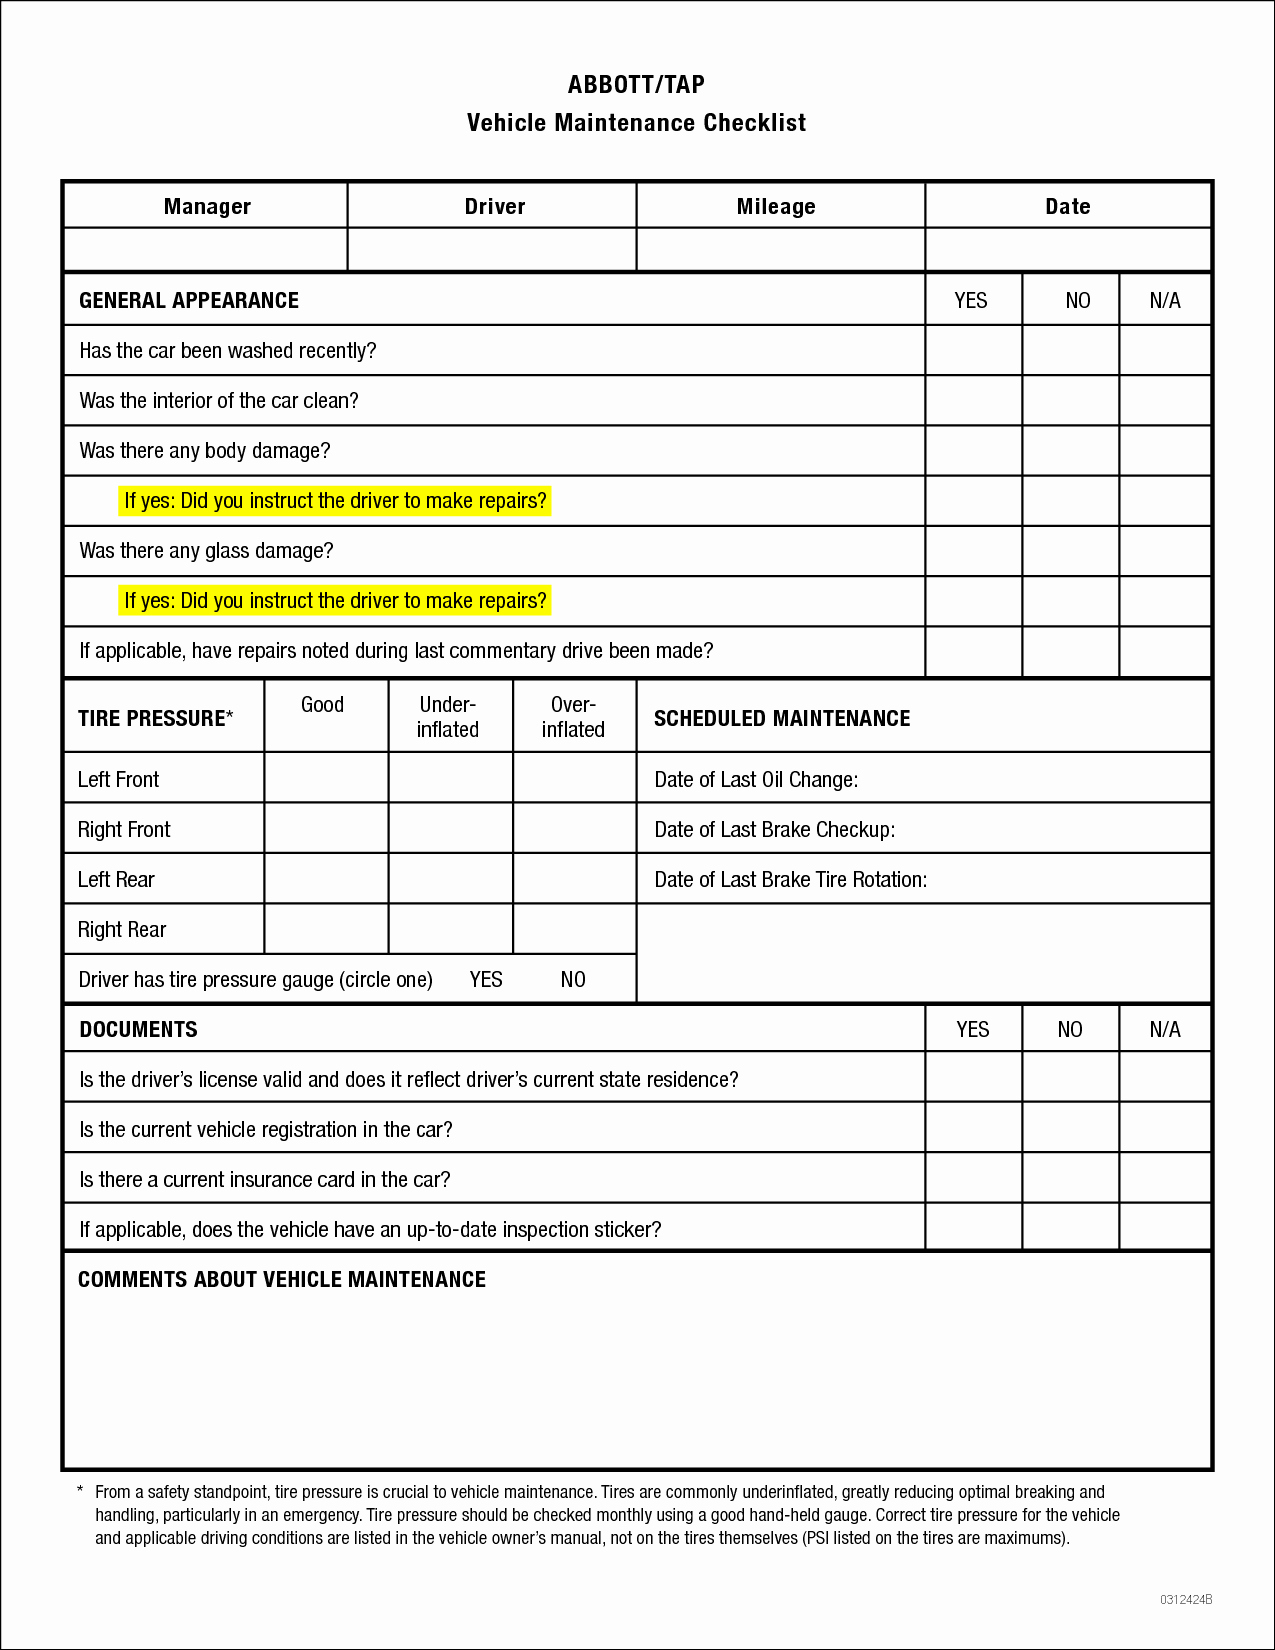 Car Maintenance Schedule Template New Vehicle Maintenance Checklist Template Want A Smart Way to